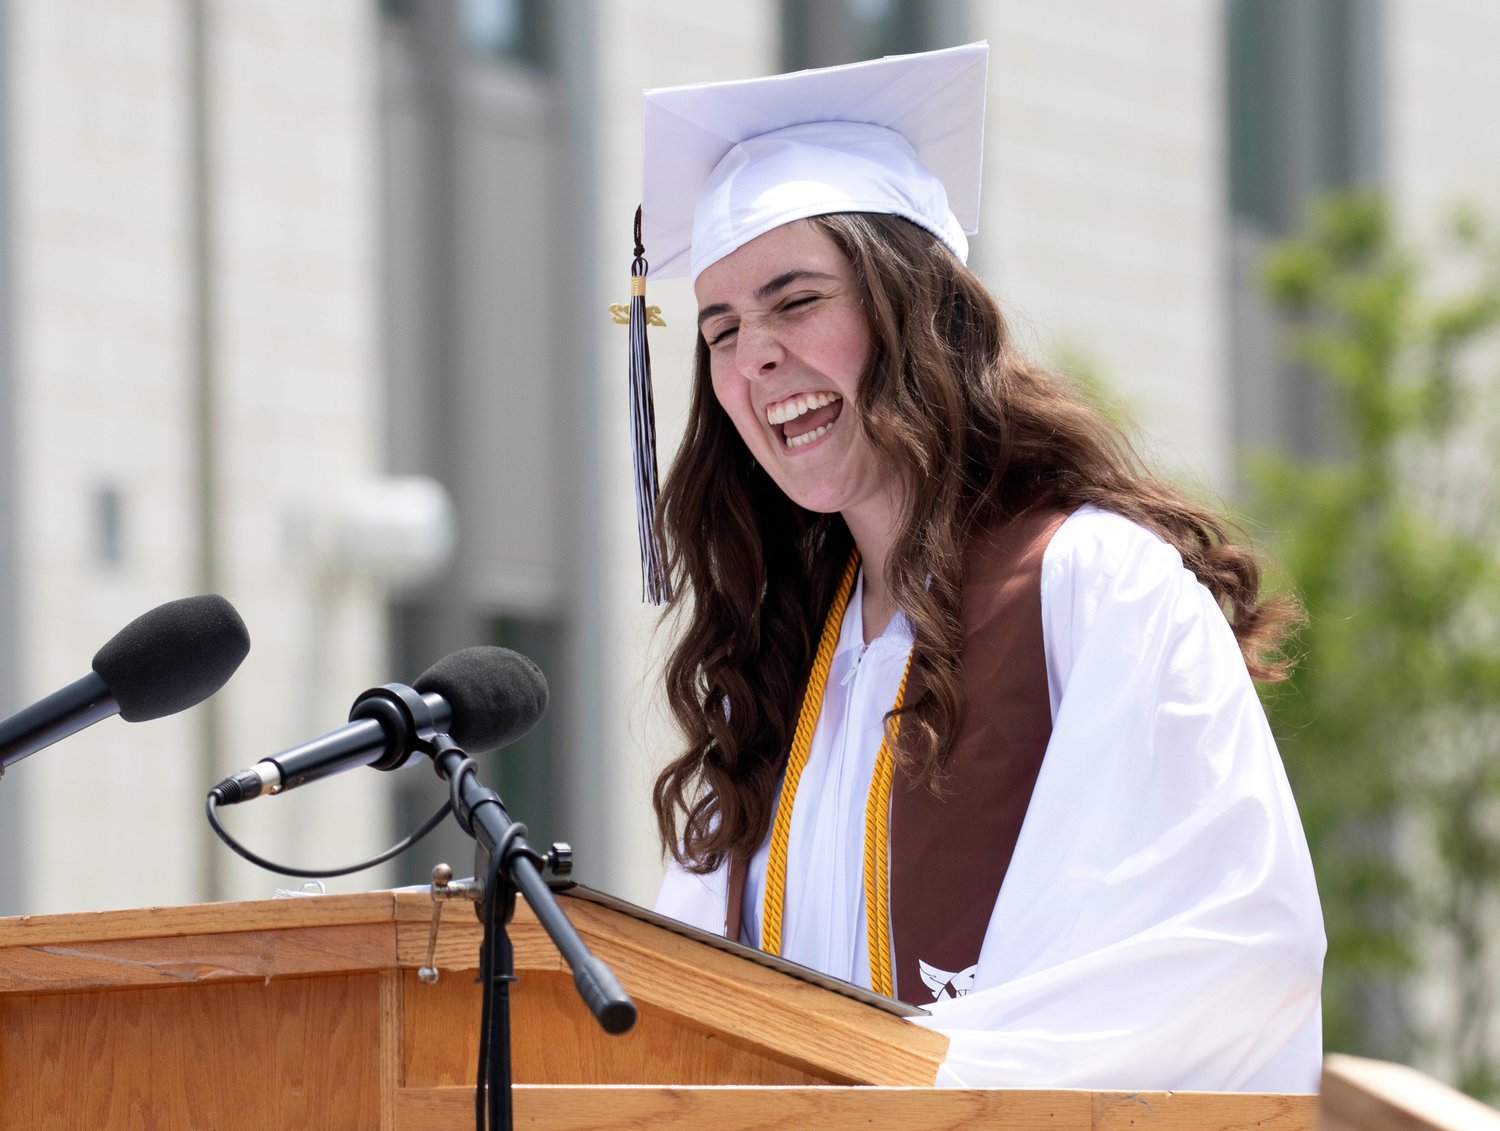 Class president Kyra Ferreria told her classmates to never stop learning, and always give their all. 